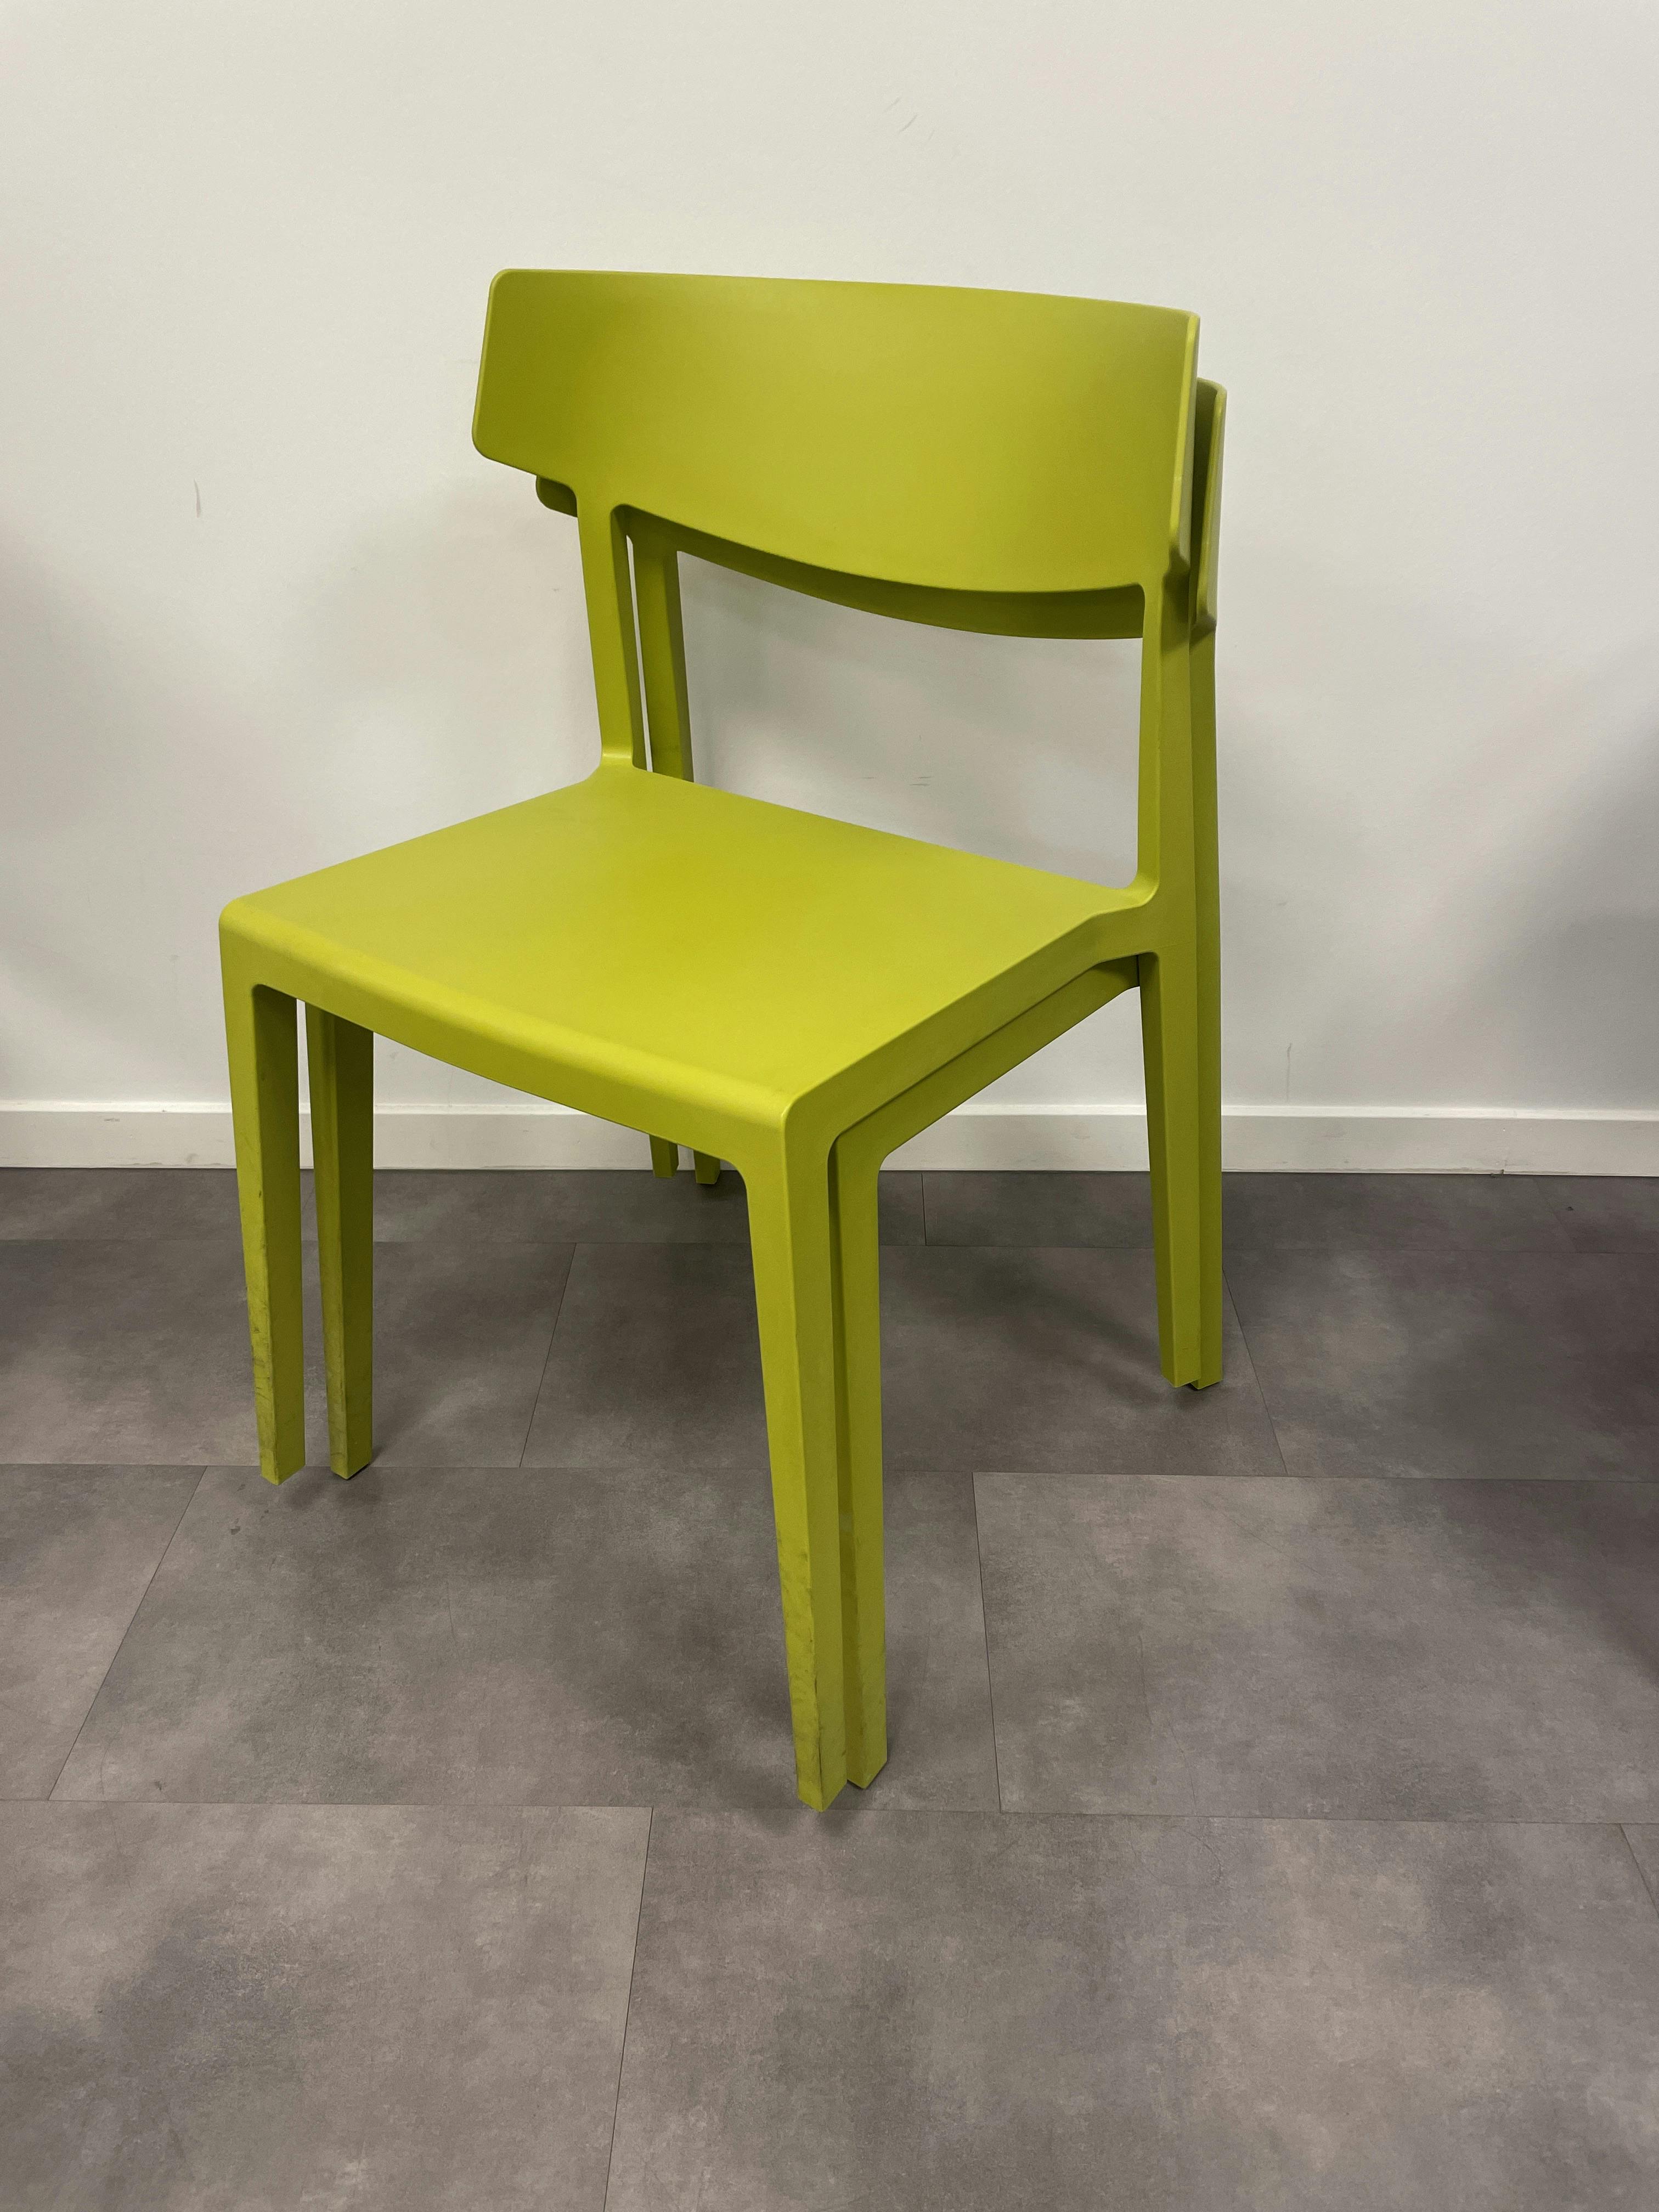 Green plastic stackable chair - Relieve Furniture